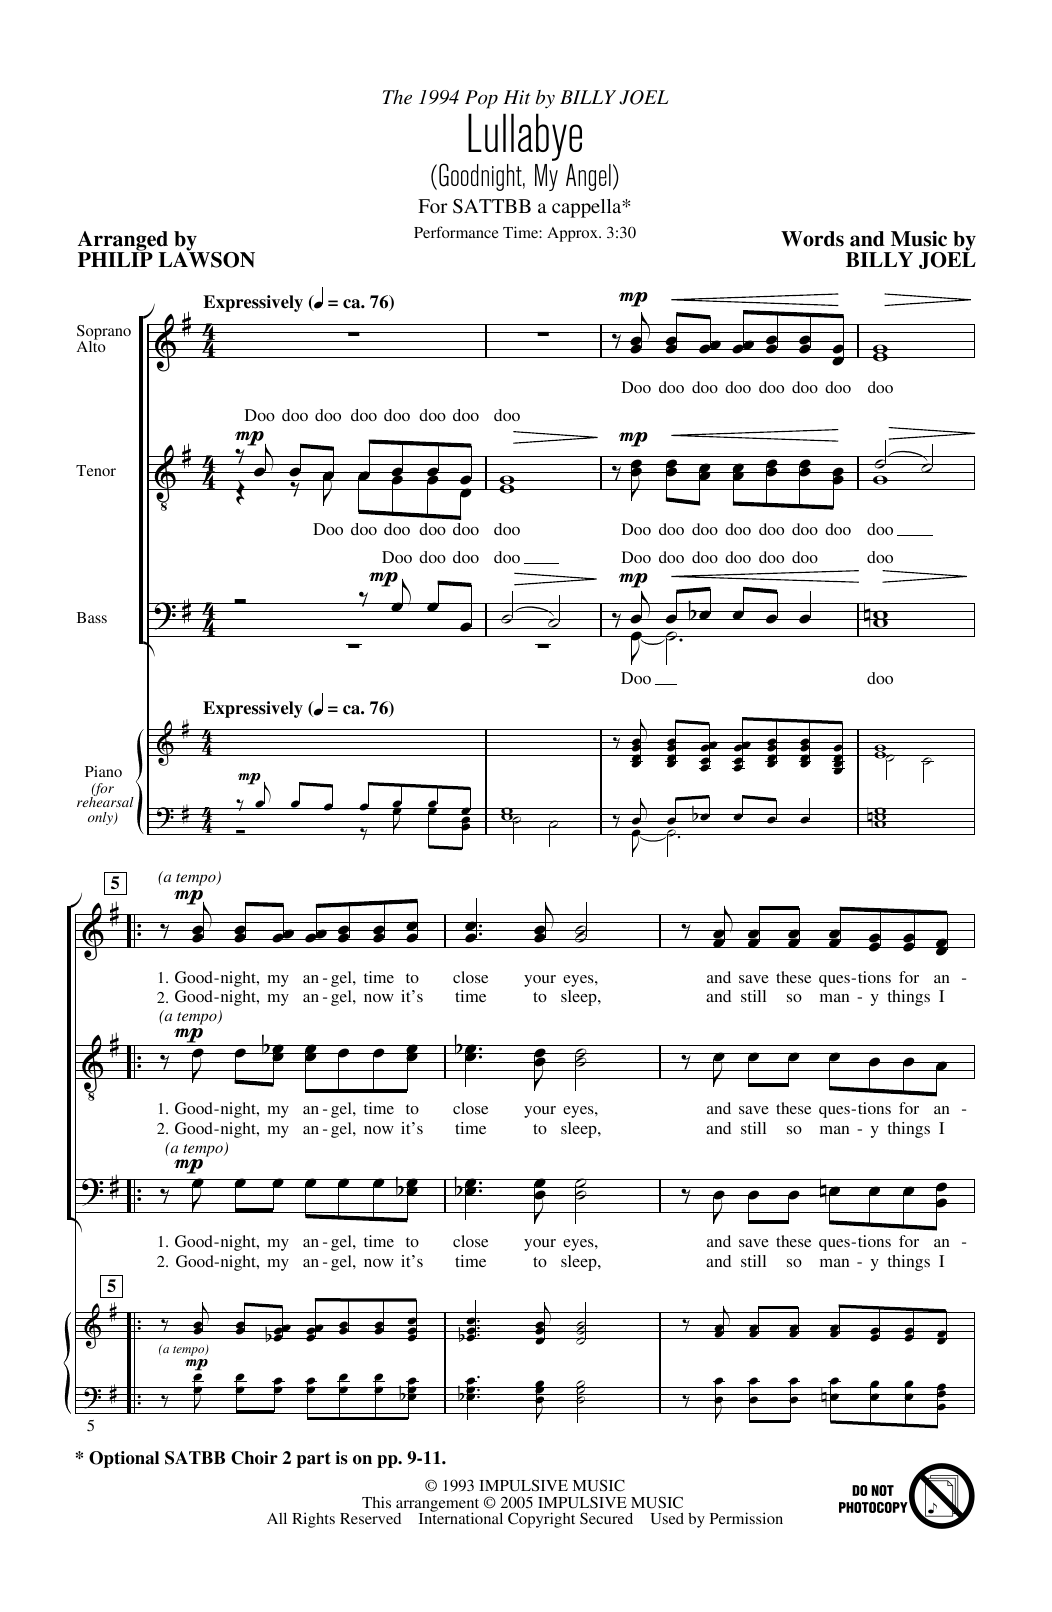 The King's Singers Lullabye (Goodnight, My Angel) (arr. Philip Lawson) sheet music notes and chords arranged for SATTBB Choir